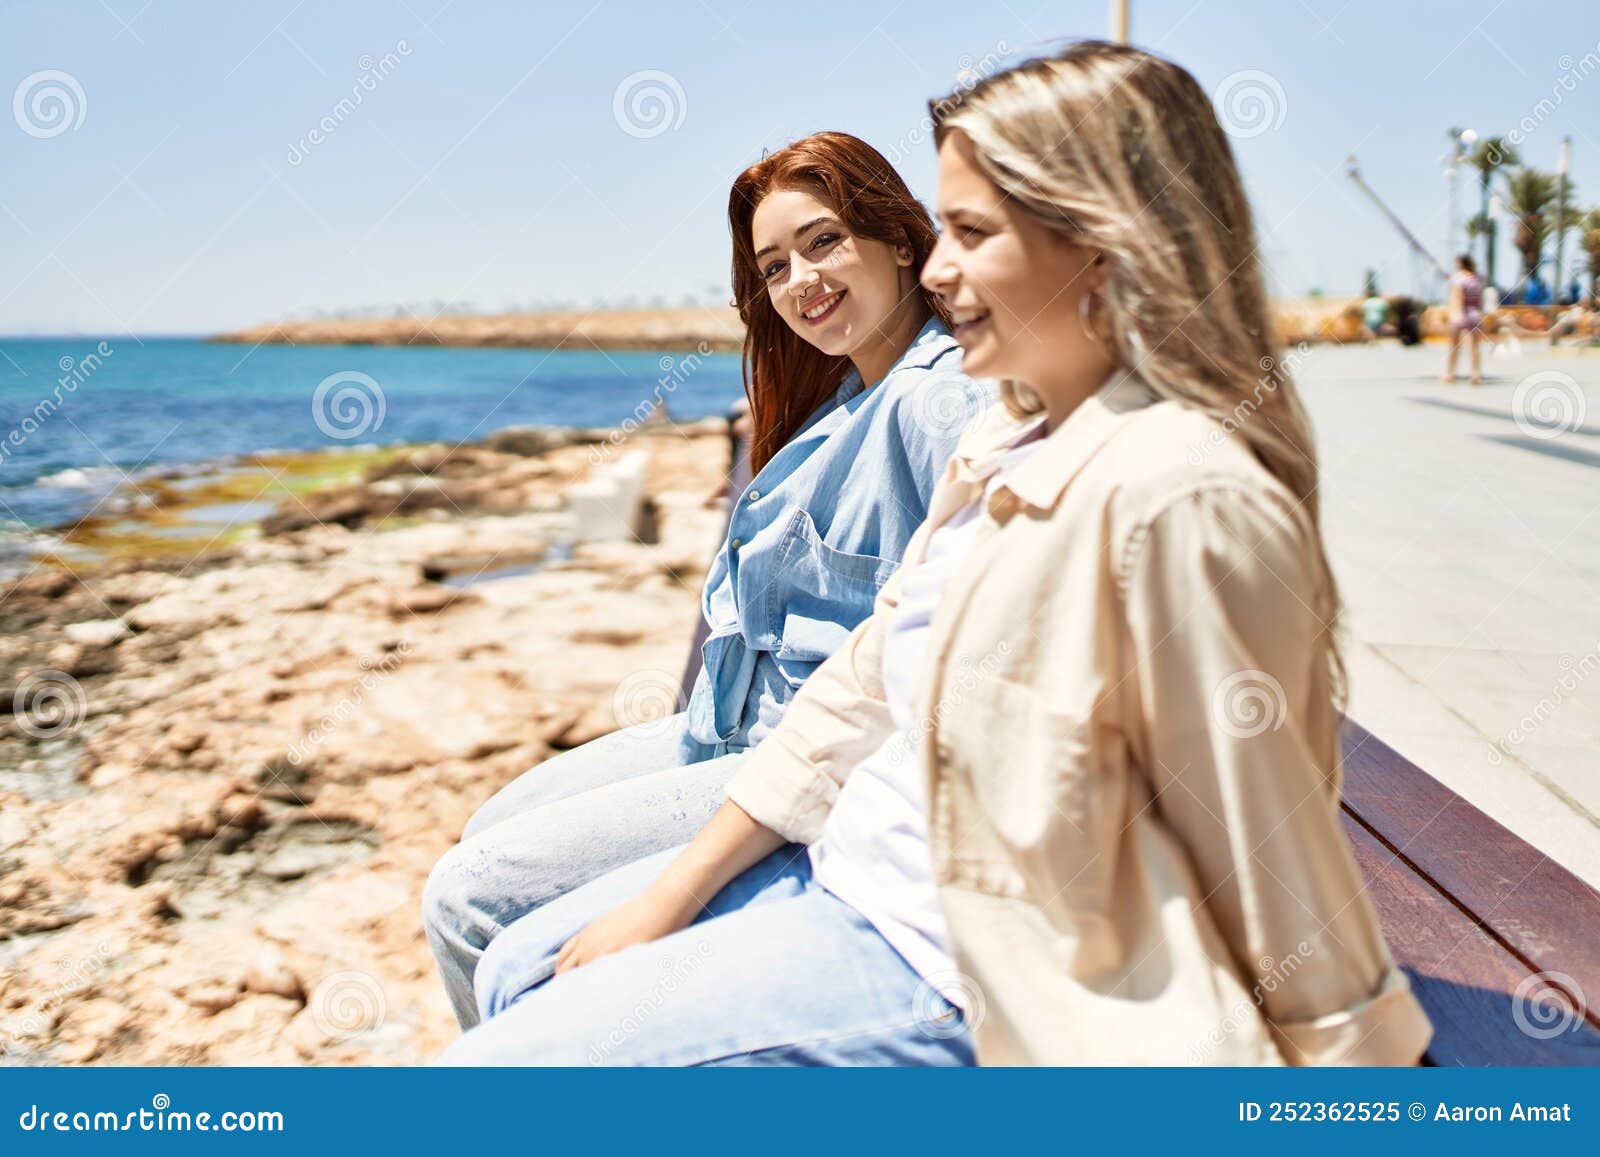 Young Lesbian Couple Of Two Women In Love At The Beach Stock Image 